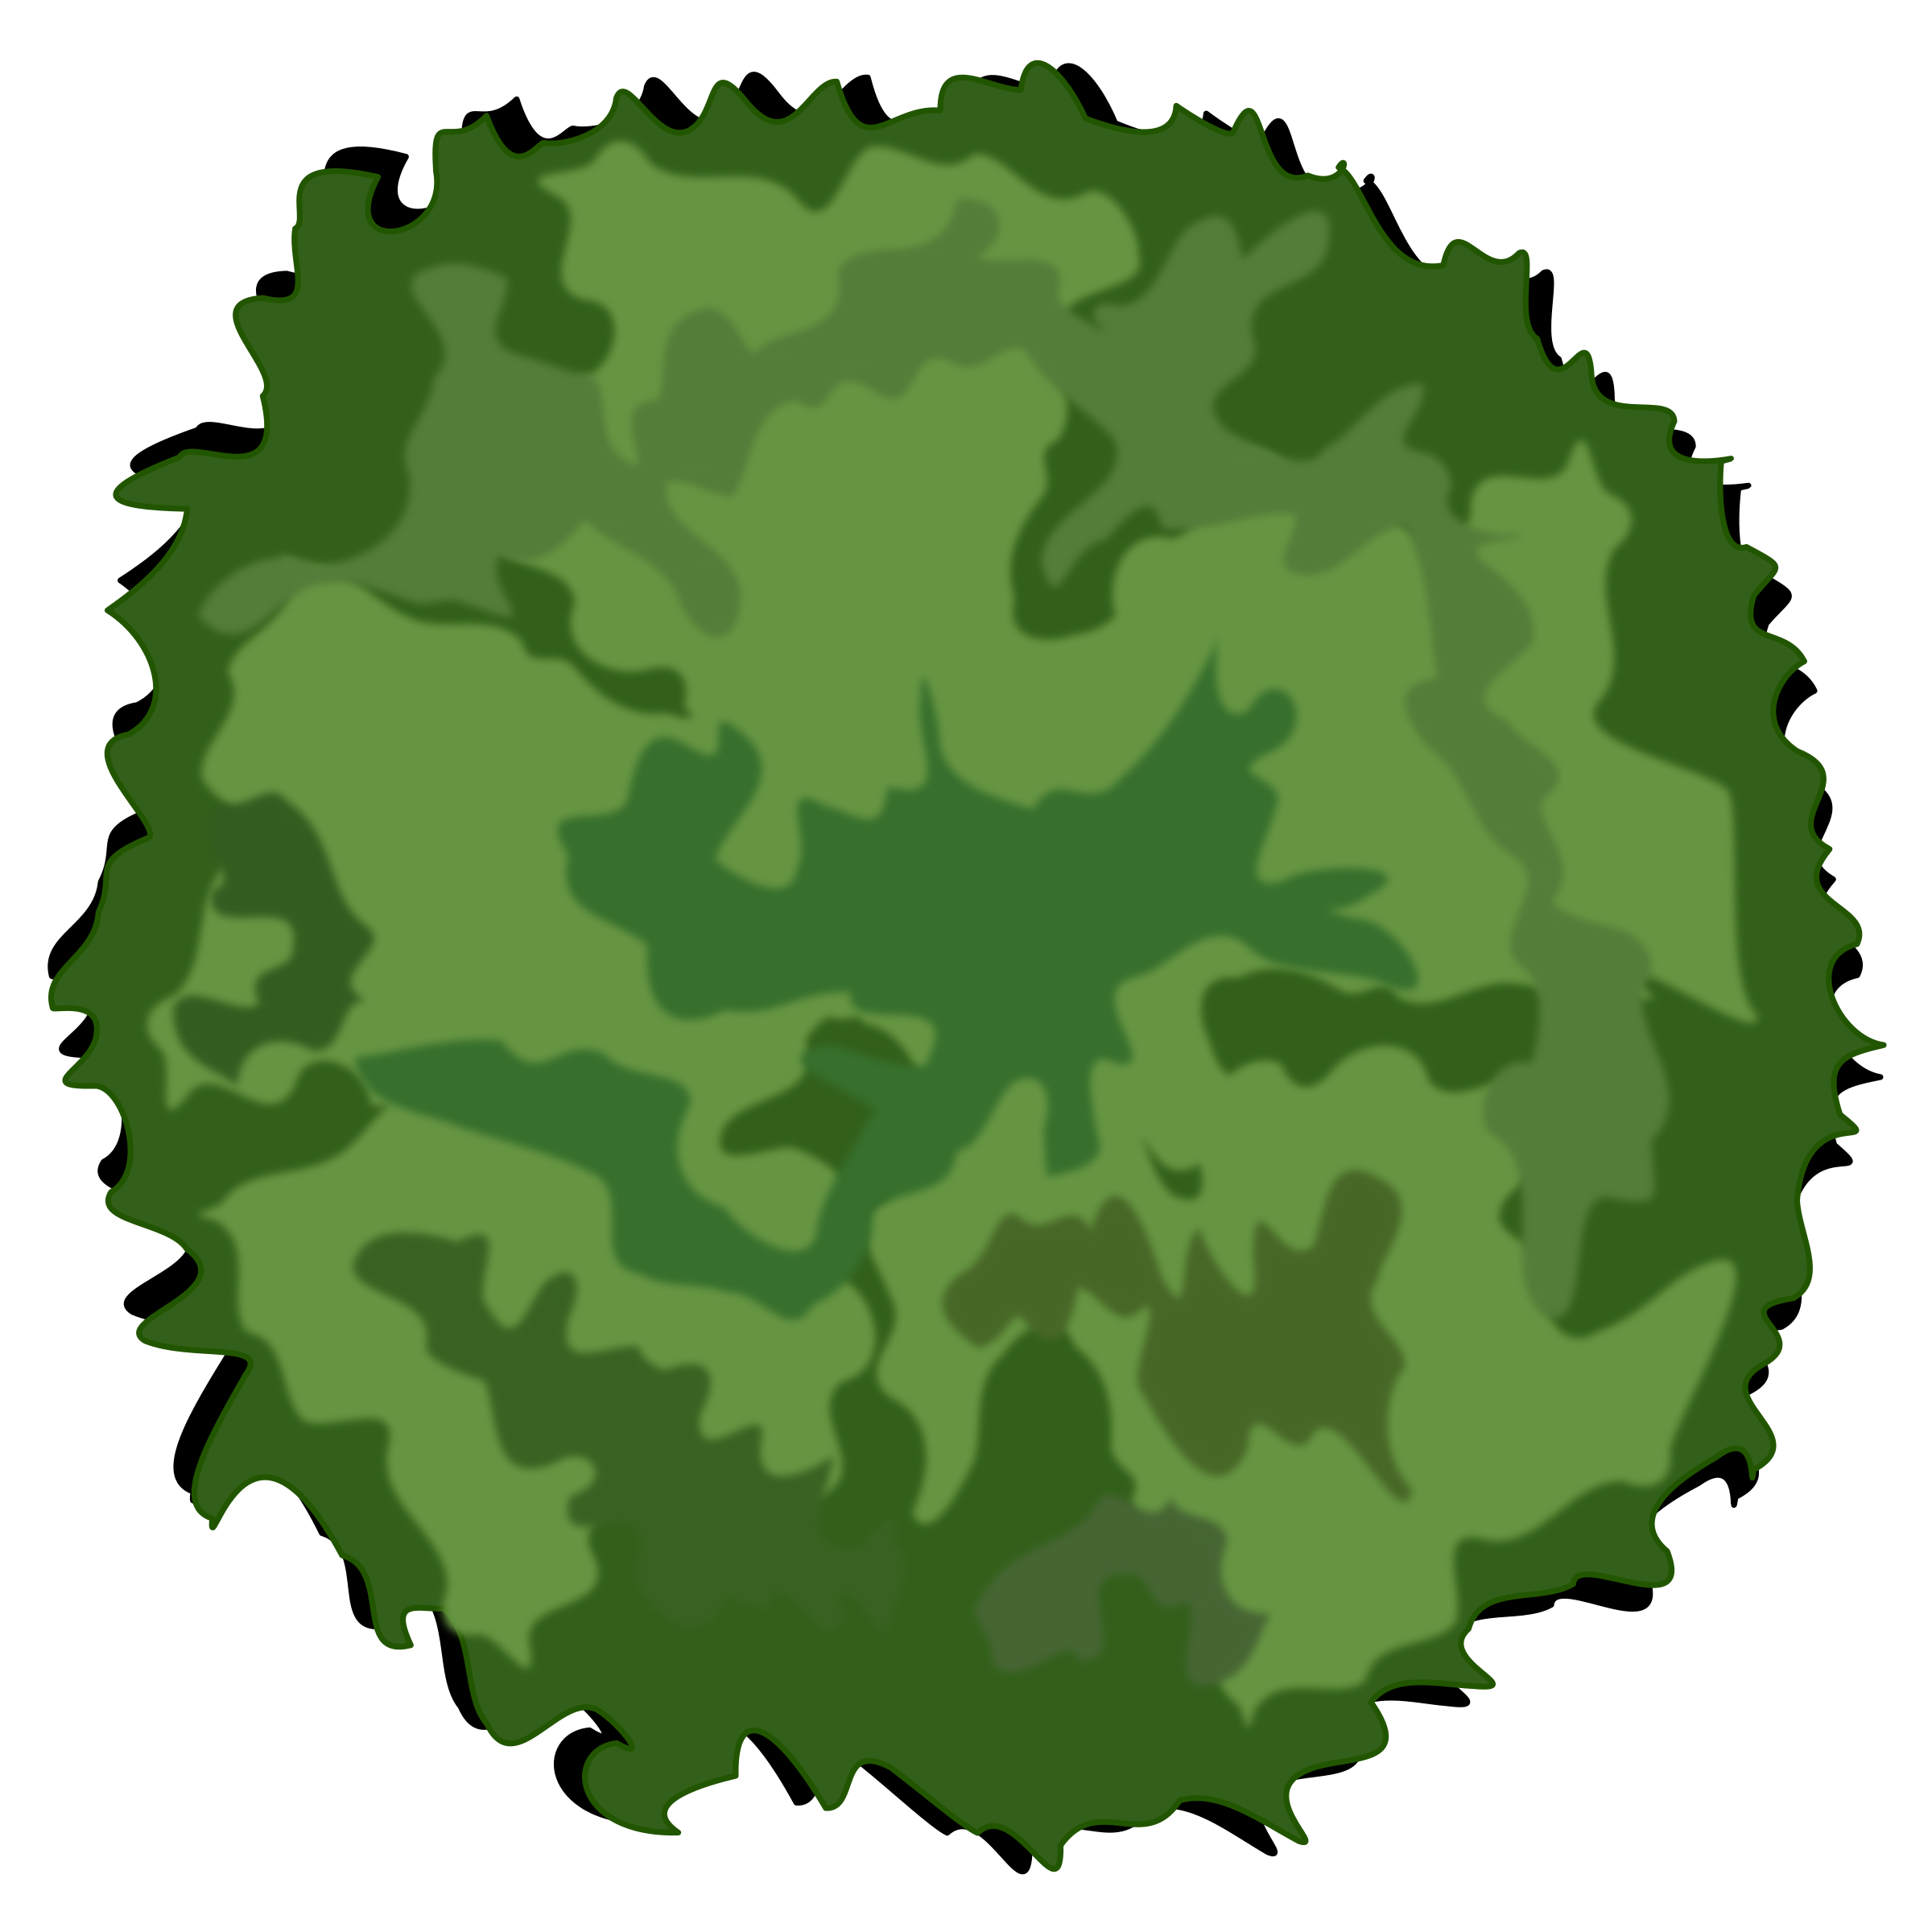 bushes clipart tree top